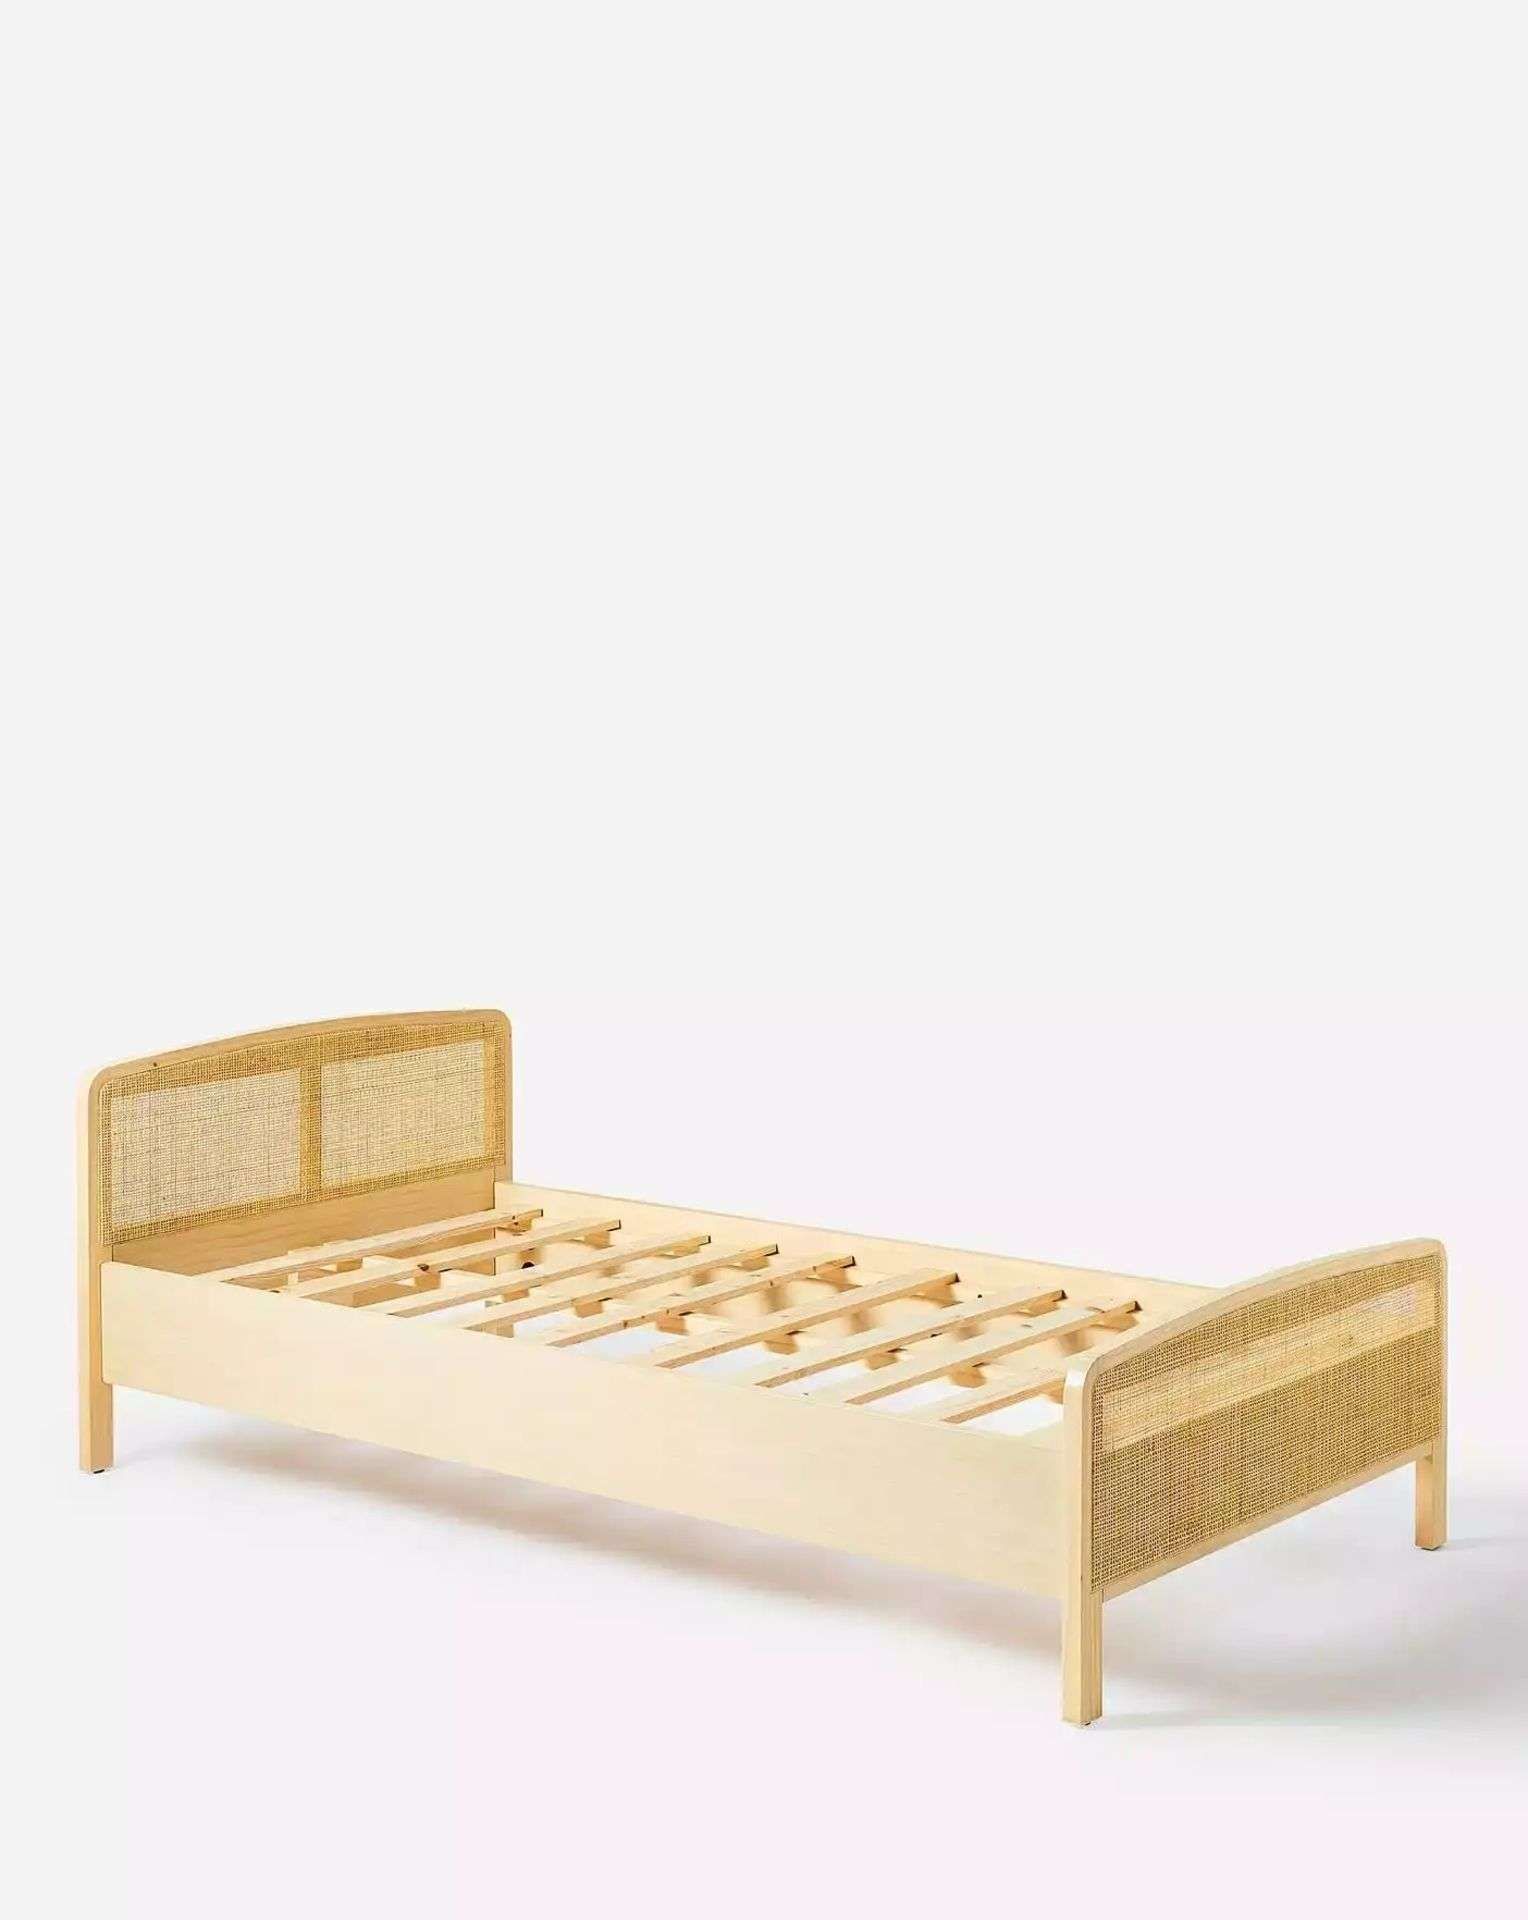 TRADE PALLET TO CONTAIN 4x BRAND NEW Noah Rattan Kids Bedframe. RRP £449 EACH. Beautifully made, our - Image 2 of 2